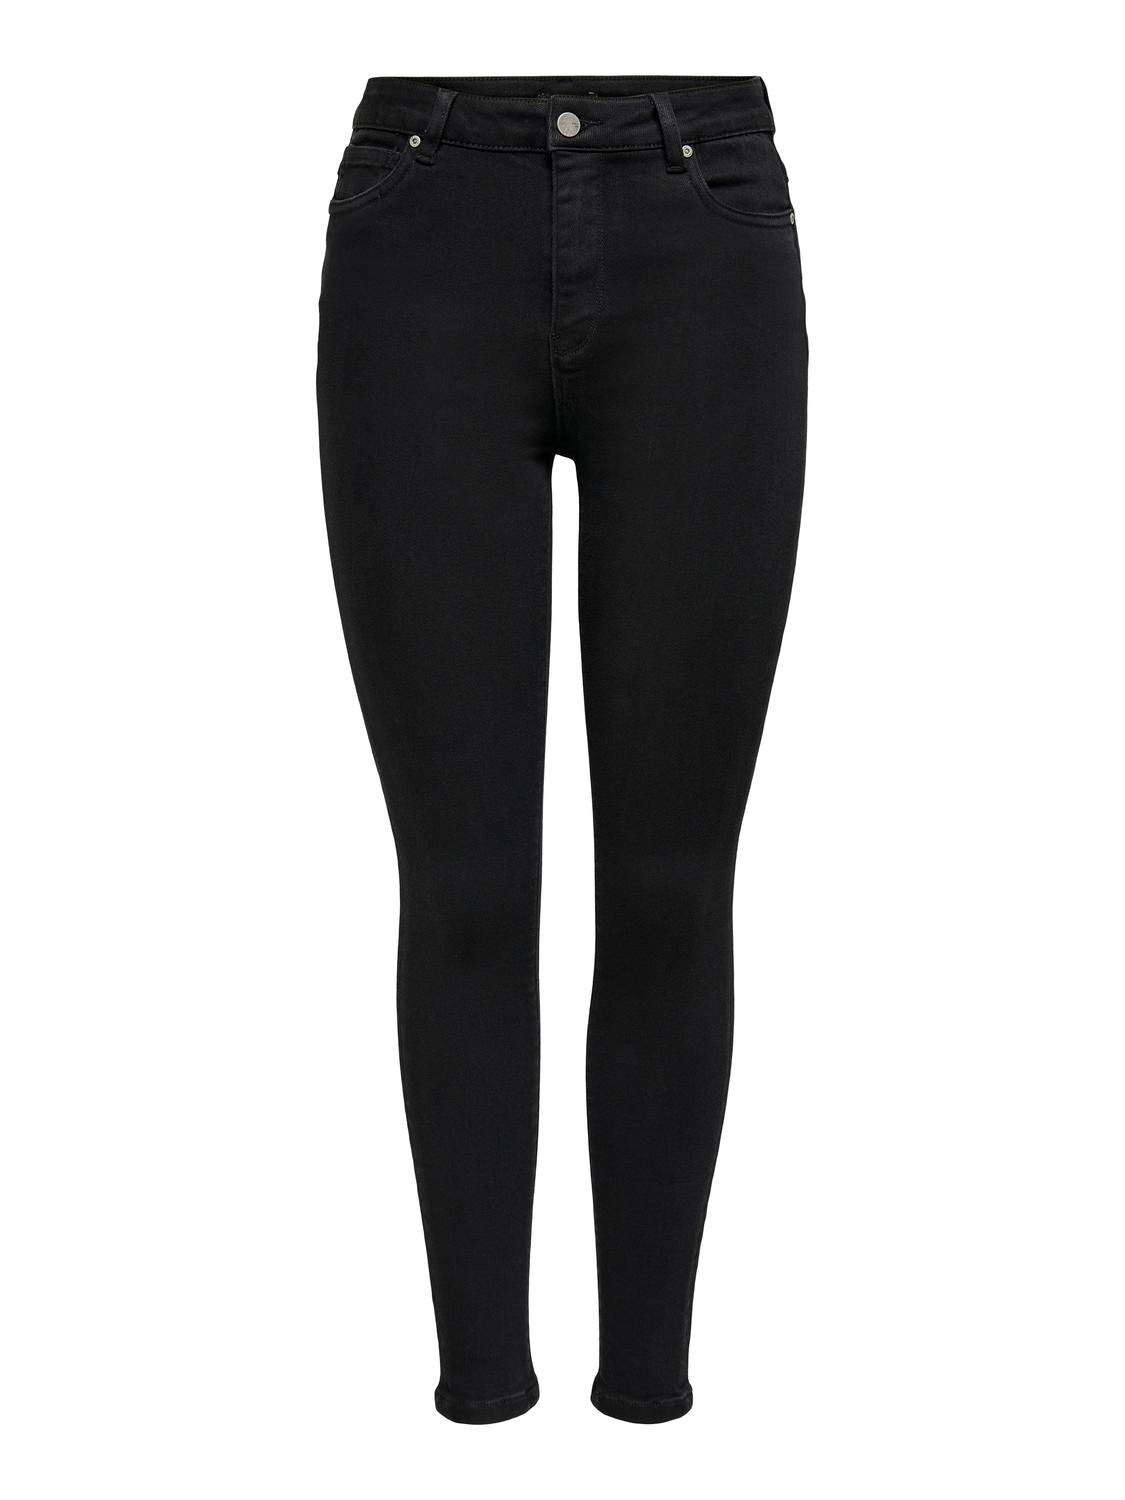 ONLY Skinny Fit High waist Jeans -Black - 15249386